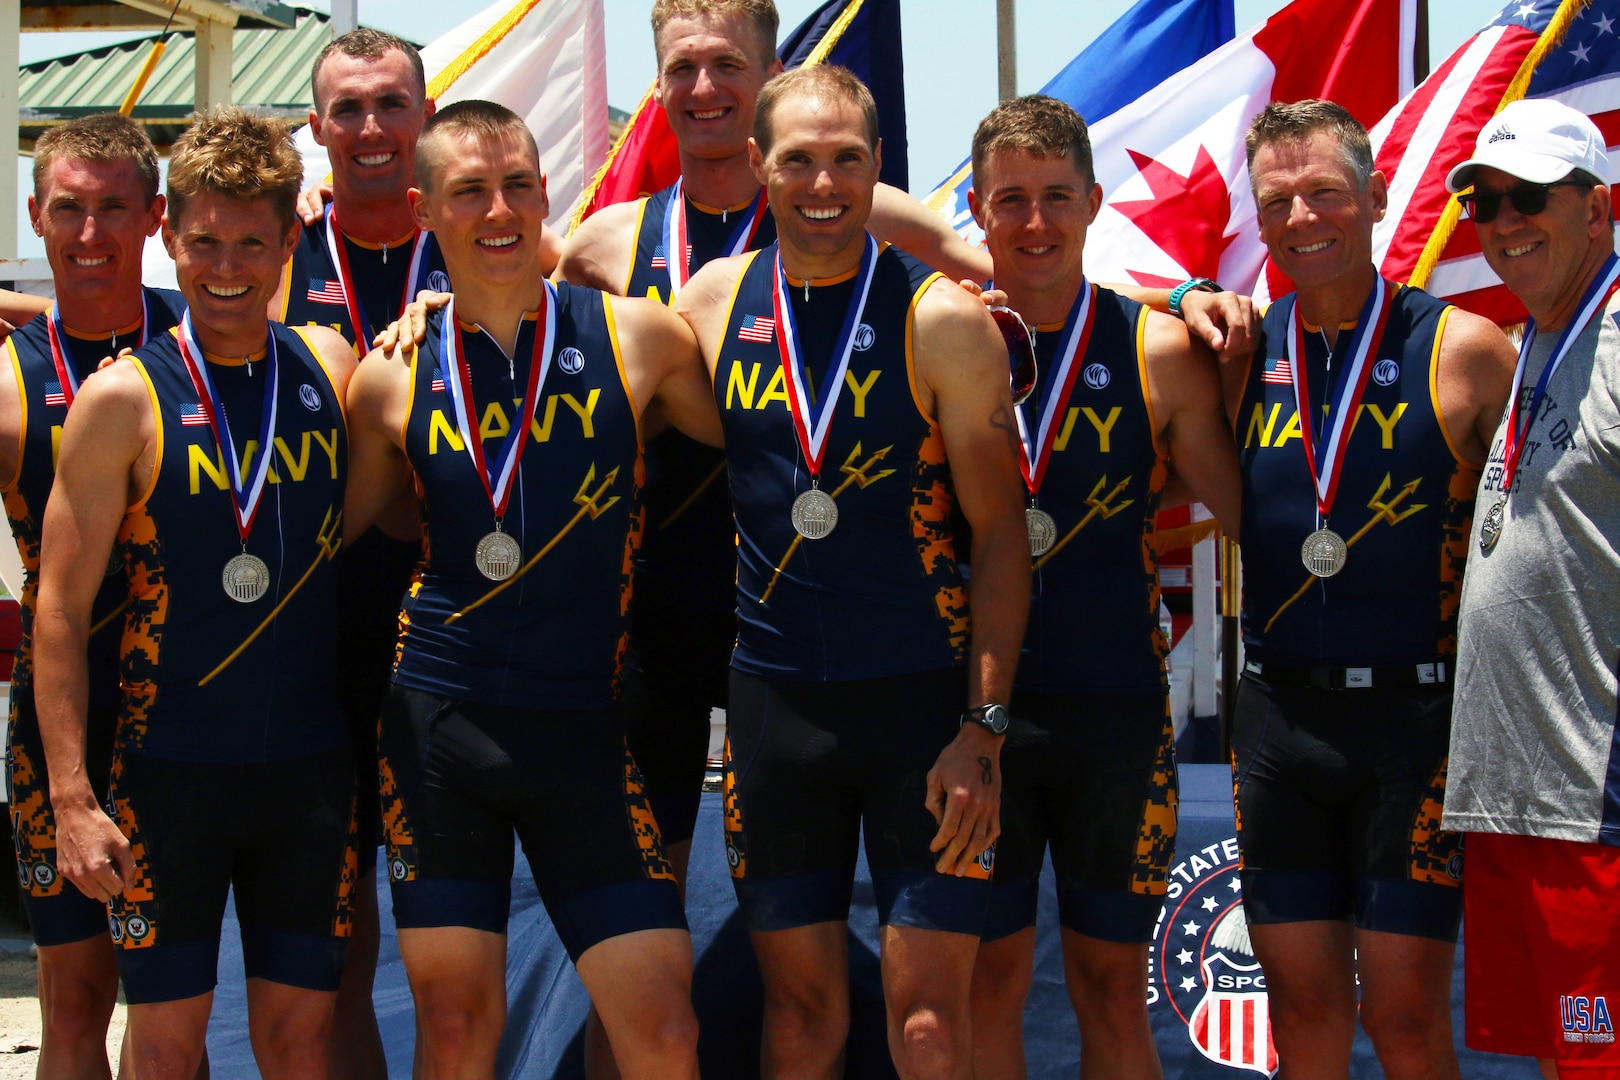 Navy captures Armed Forces Men's Team Silver.  The 2016 Armed Forces Triathlon Championship was held at Naval Base Ventura County, Calif. on 18 June.  